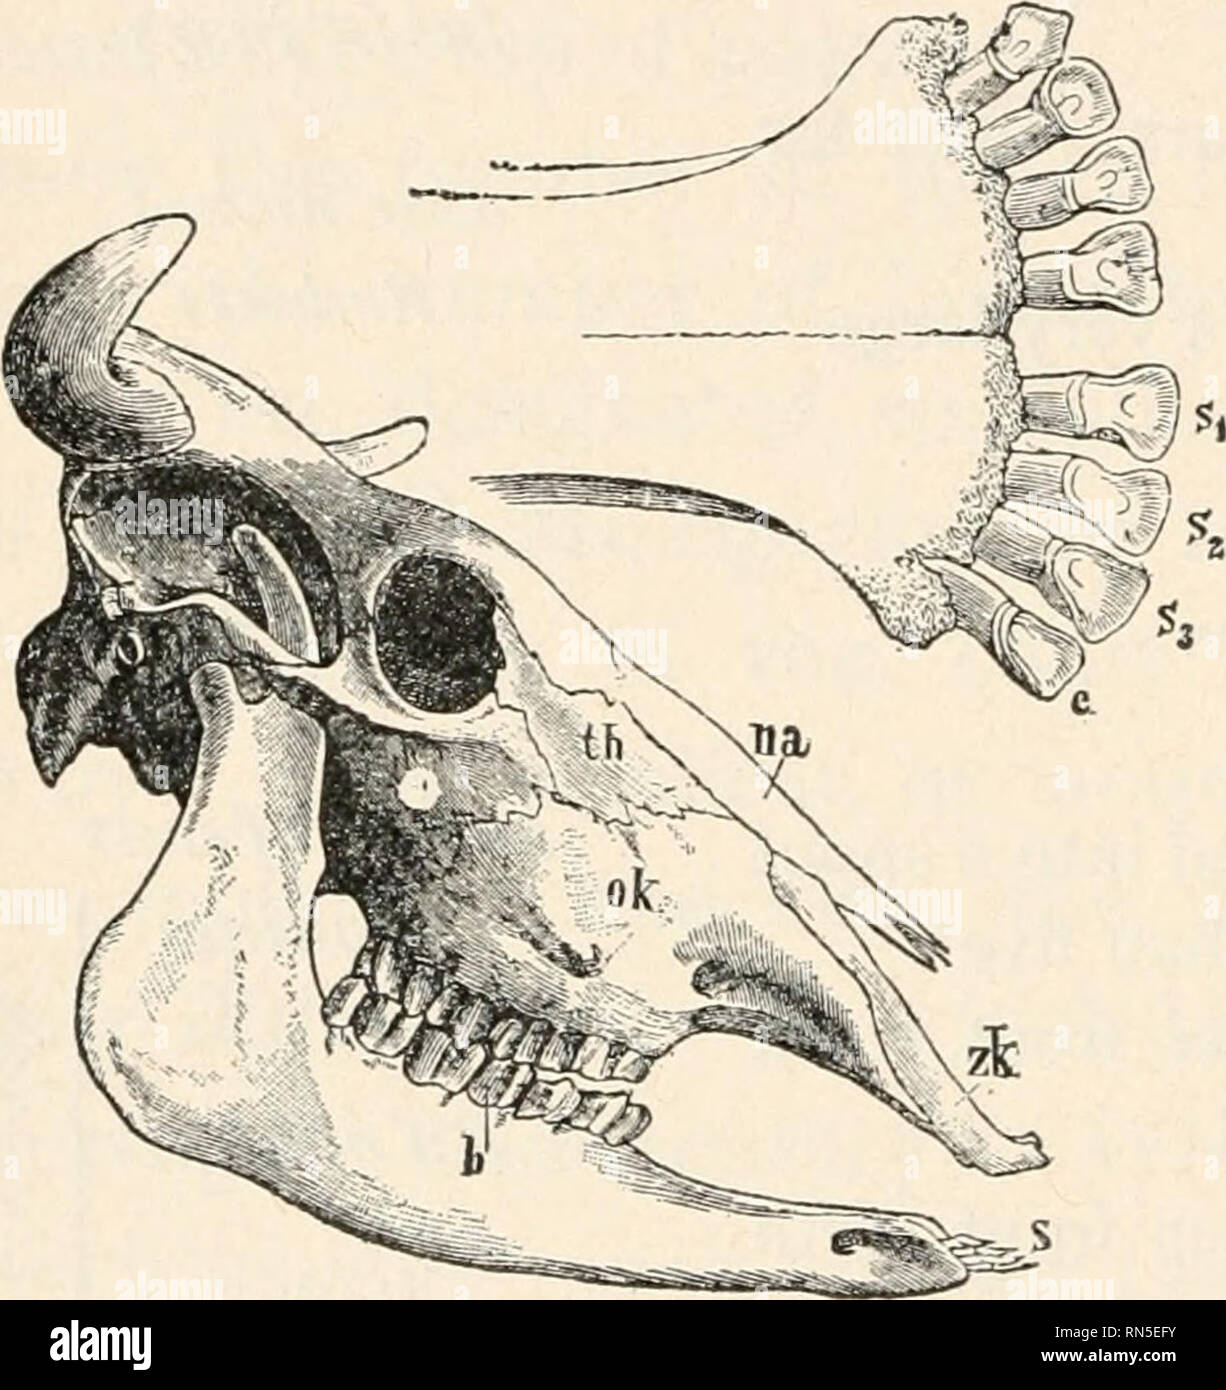 Animal Biology Human Biology Parts Ii Amp Iii Of First Course In Biology Biology 194 Chart Of Mammalian Skulls Illustrated Study Man S Dental Formula Is At Gt C